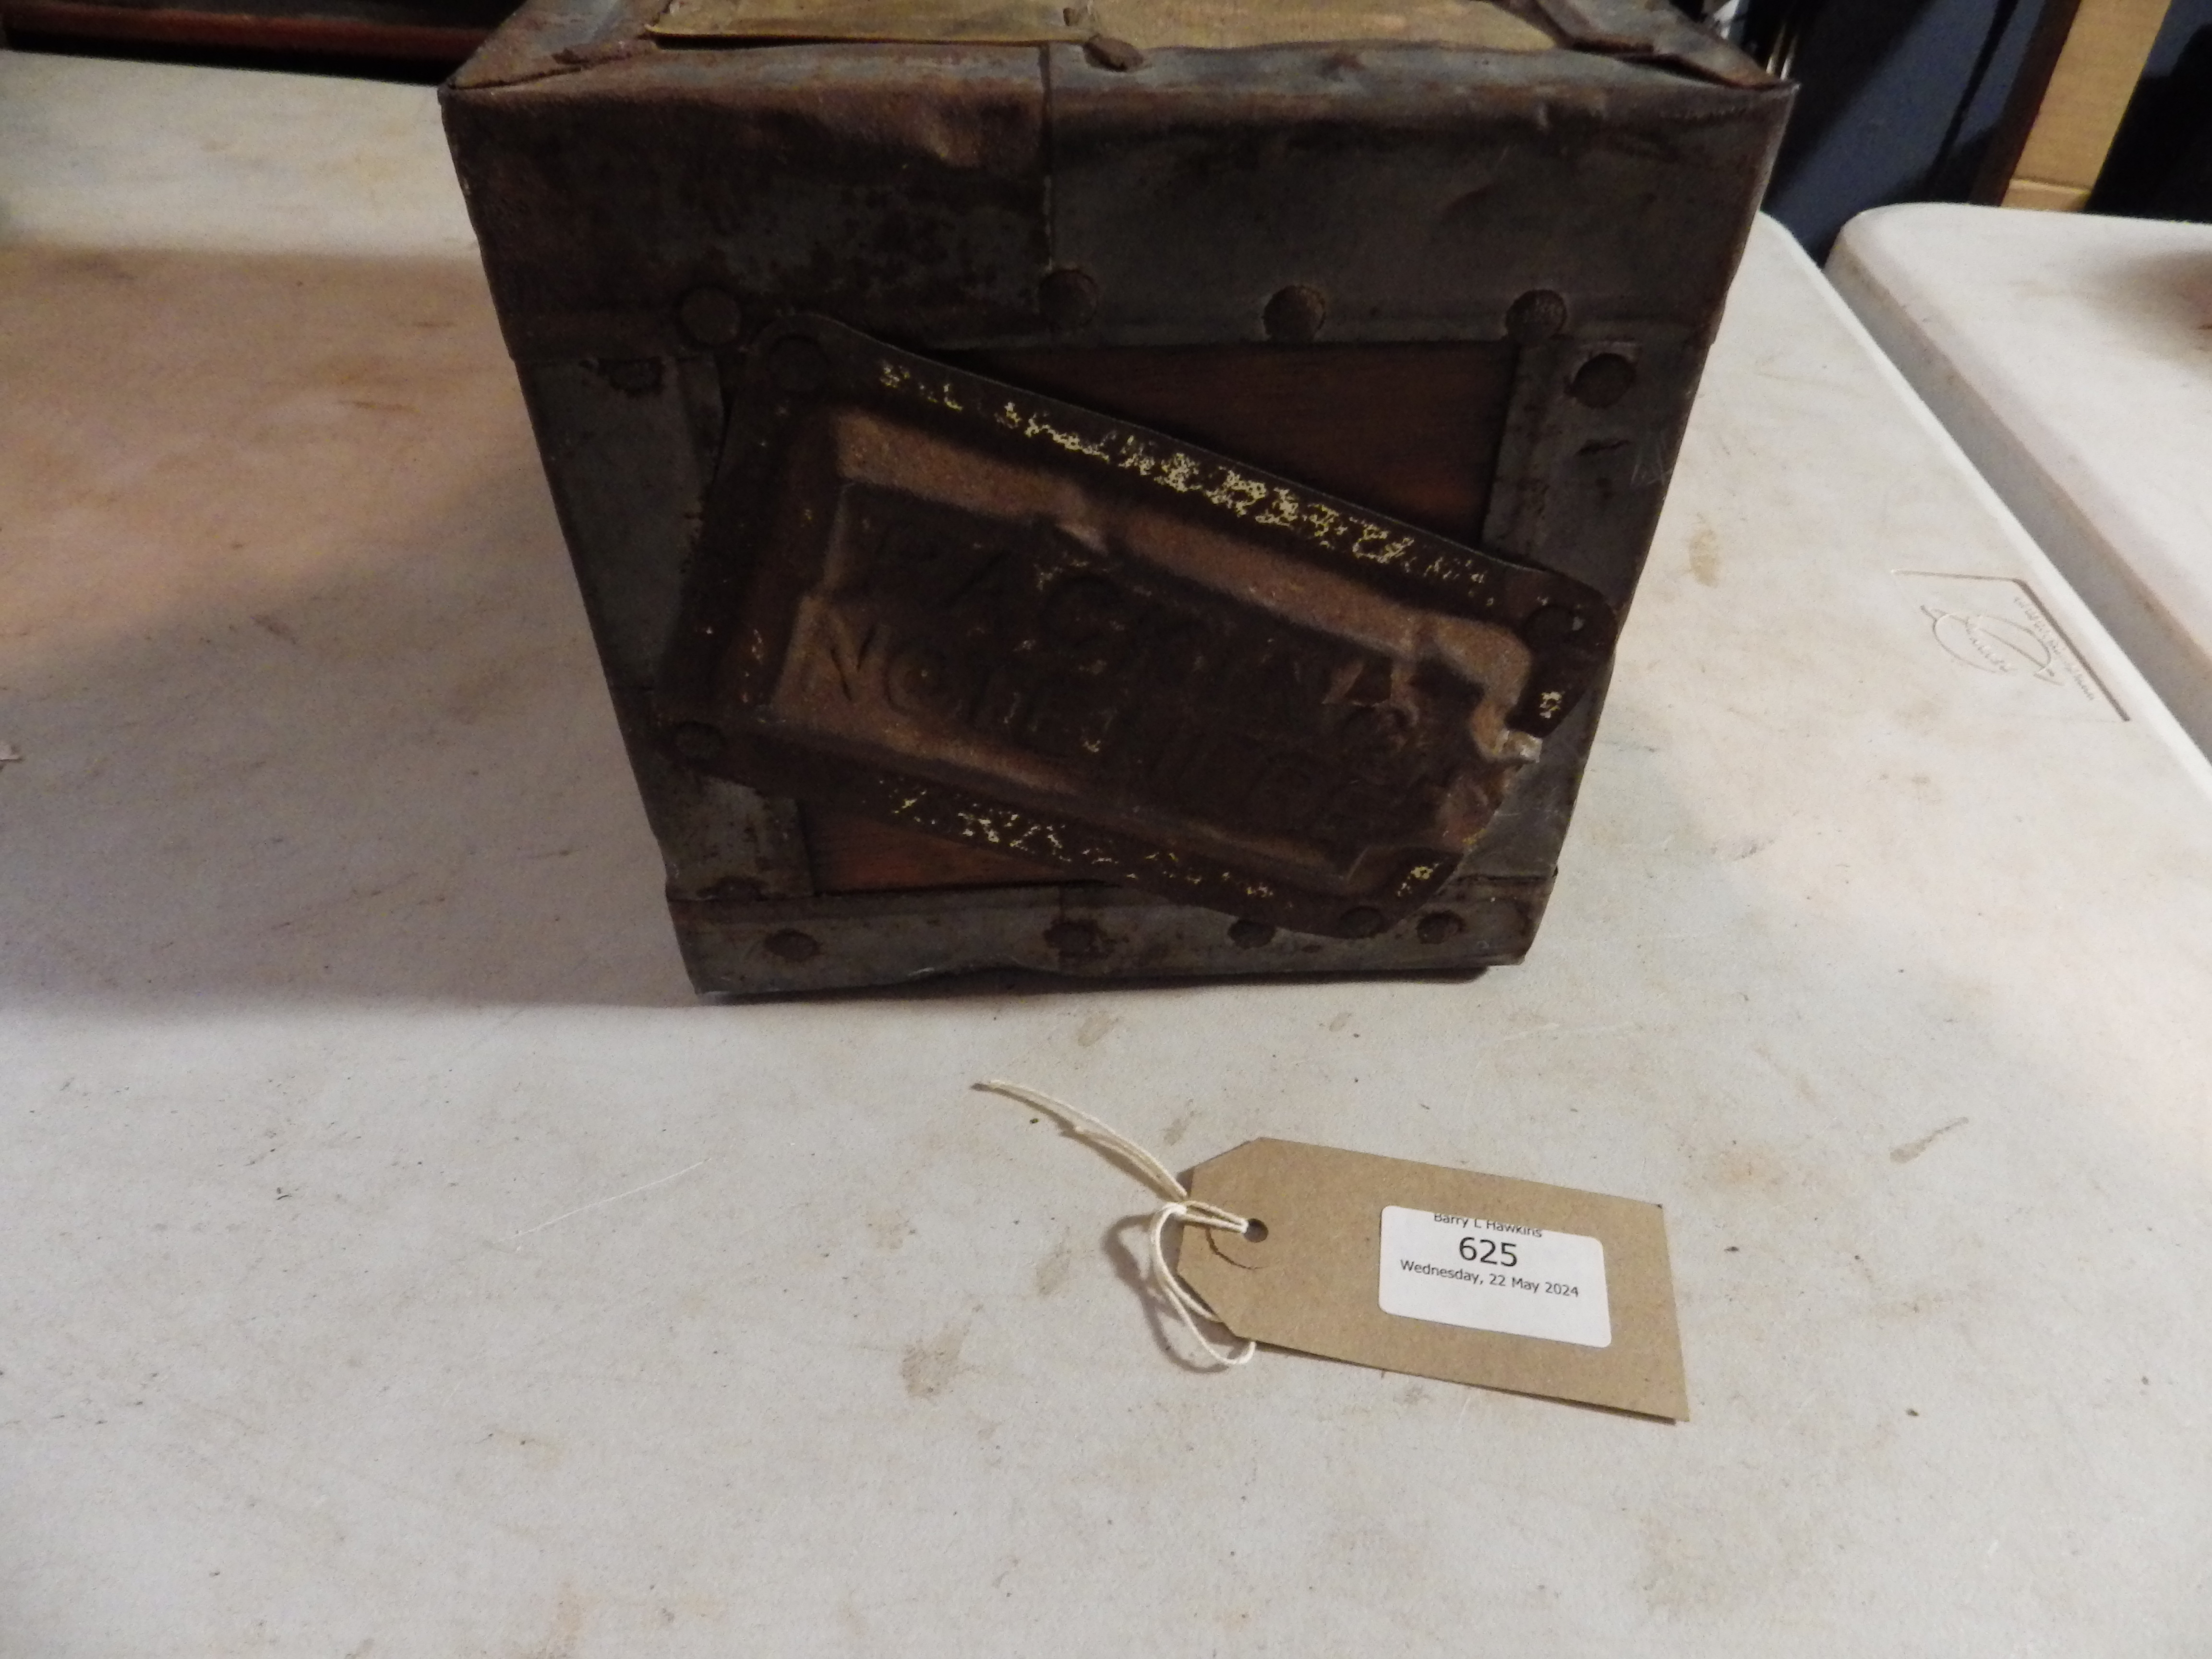 Military G S Co Ltd sealed wood box with metal banding label states containing 5 sad irons ( - Image 3 of 4